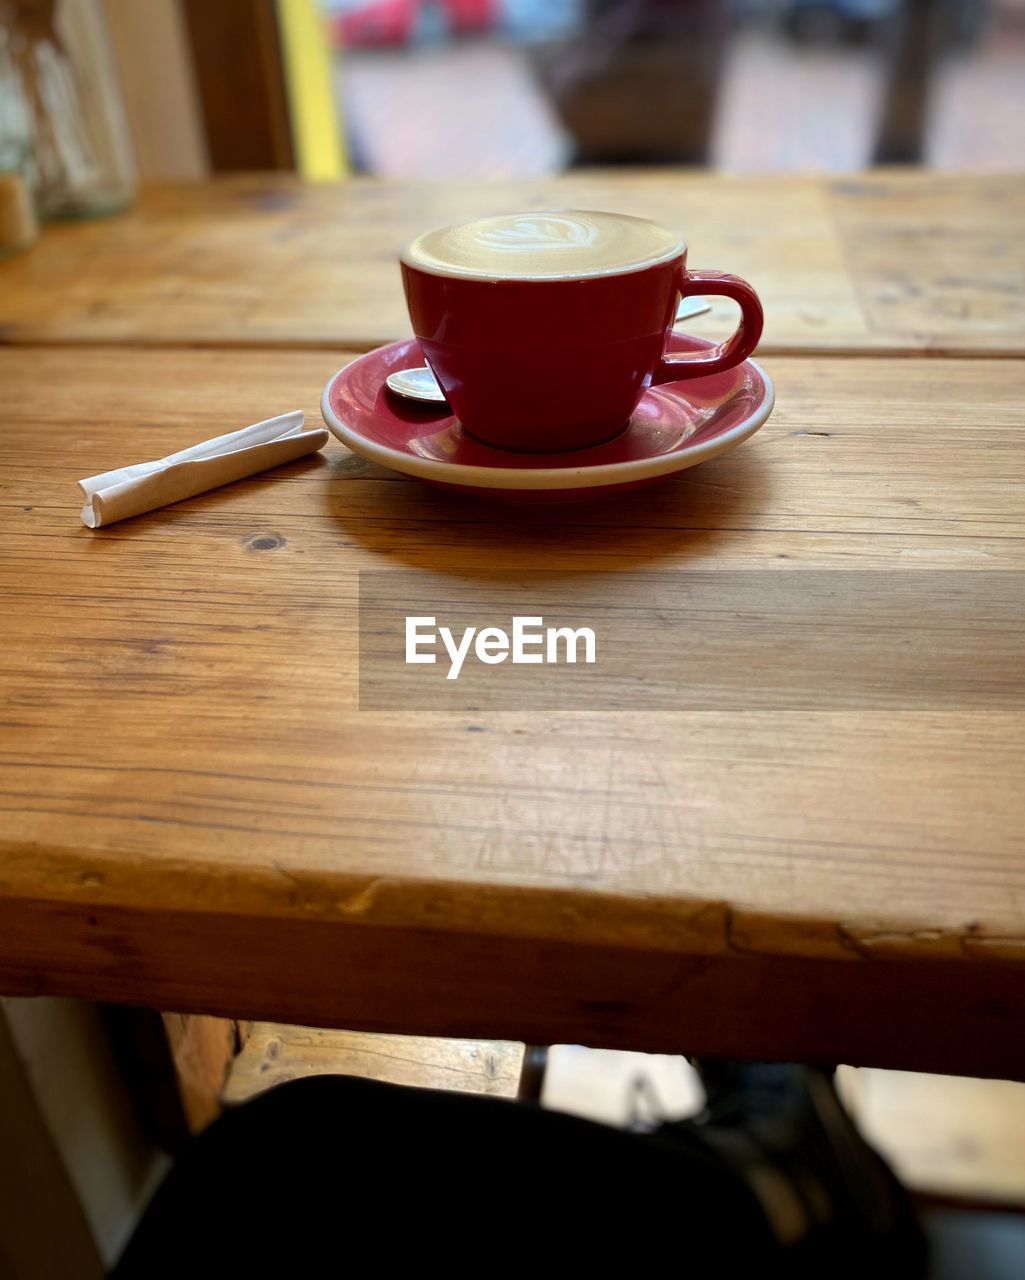 mug, cup, food and drink, table, drink, coffee cup, wood, coffee, tableware, cafe, hot drink, refreshment, indoors, crockery, saucer, spoon, kitchen utensil, focus on foreground, tea, eating utensil, furniture, seat, tea cup, restaurant, no people